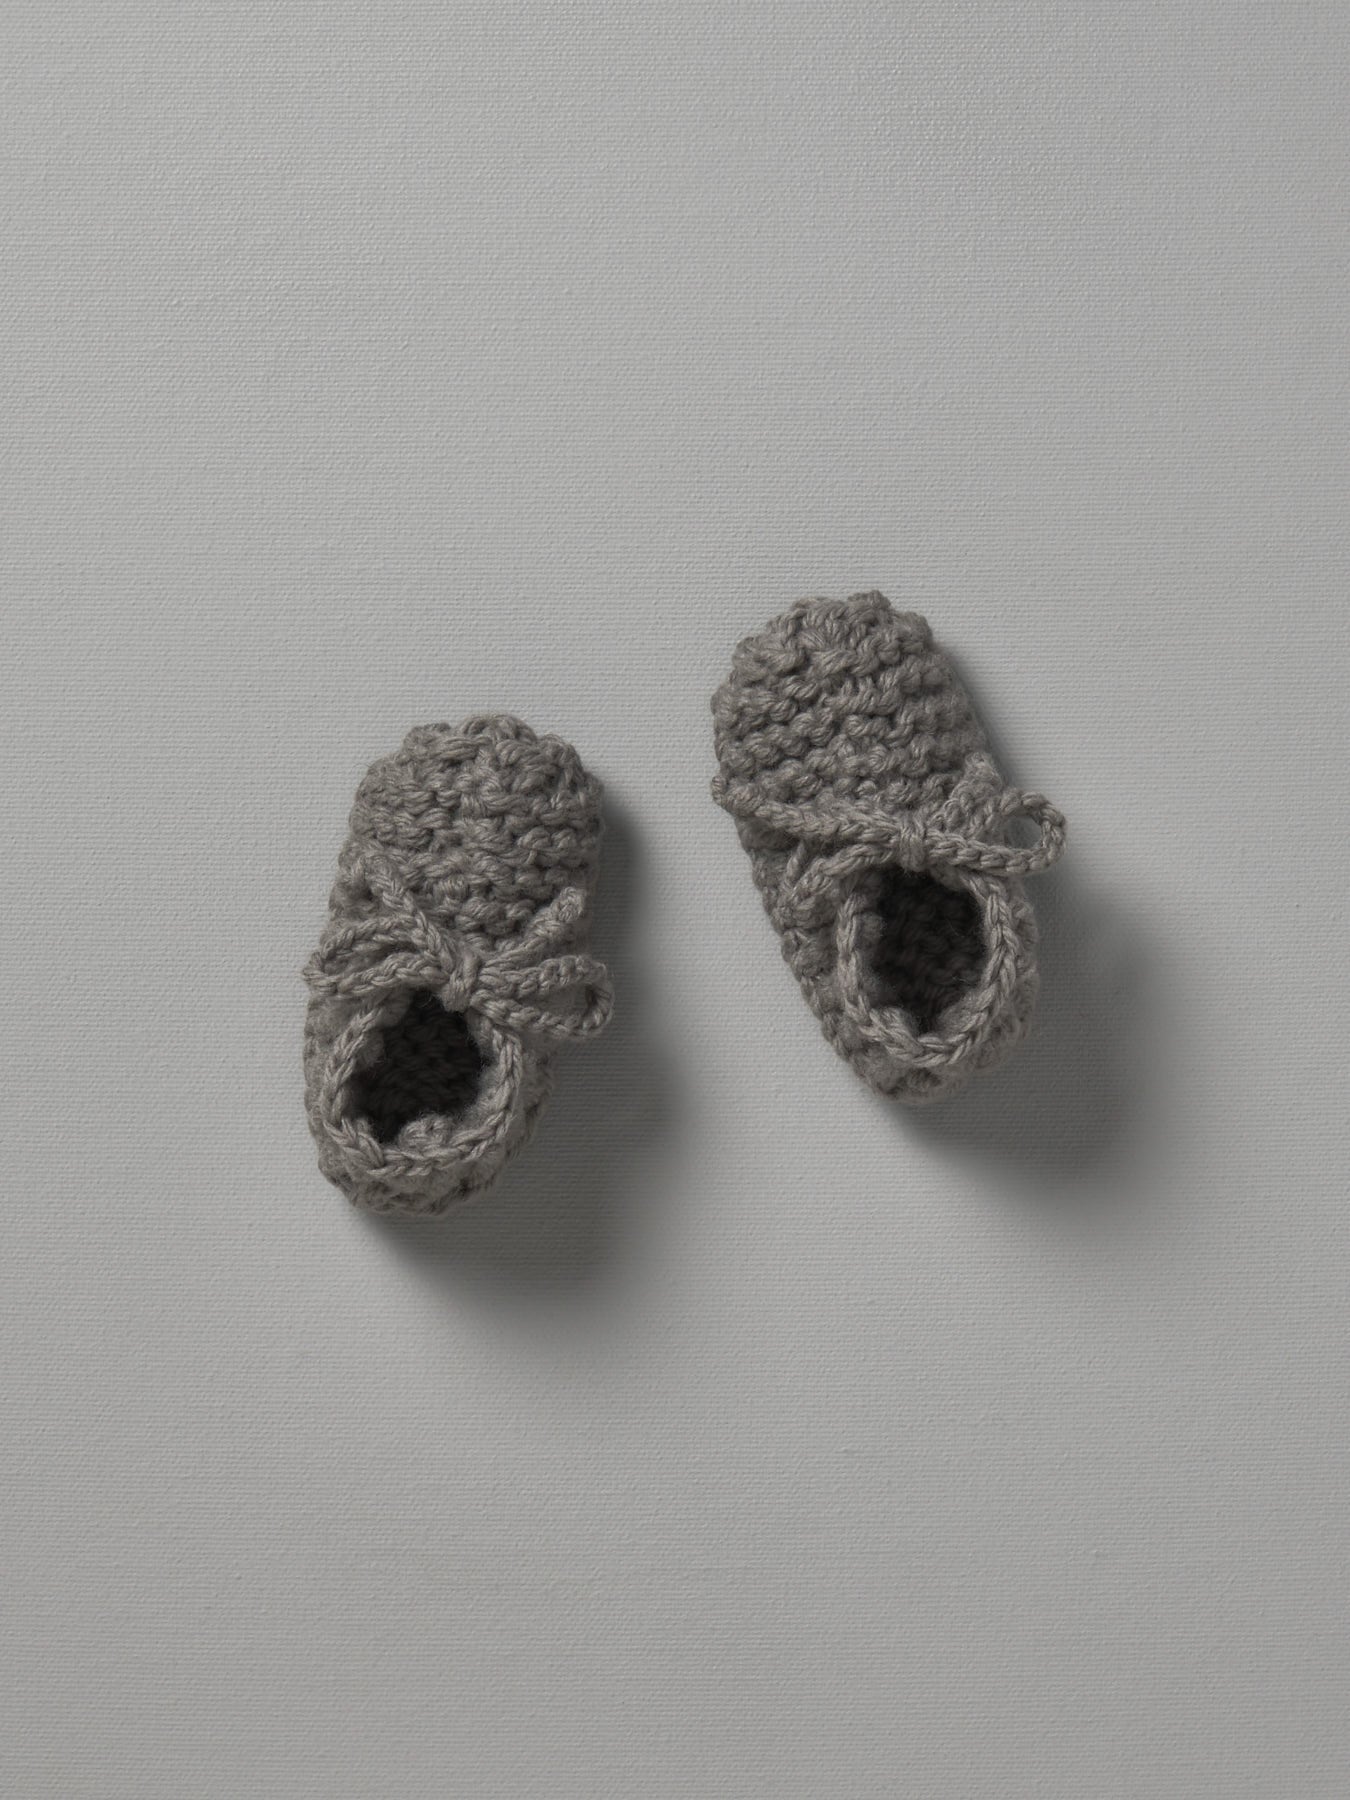 A pair of Weebits Hand Knitted Chunky Booties in Mushroom color on a white surface.